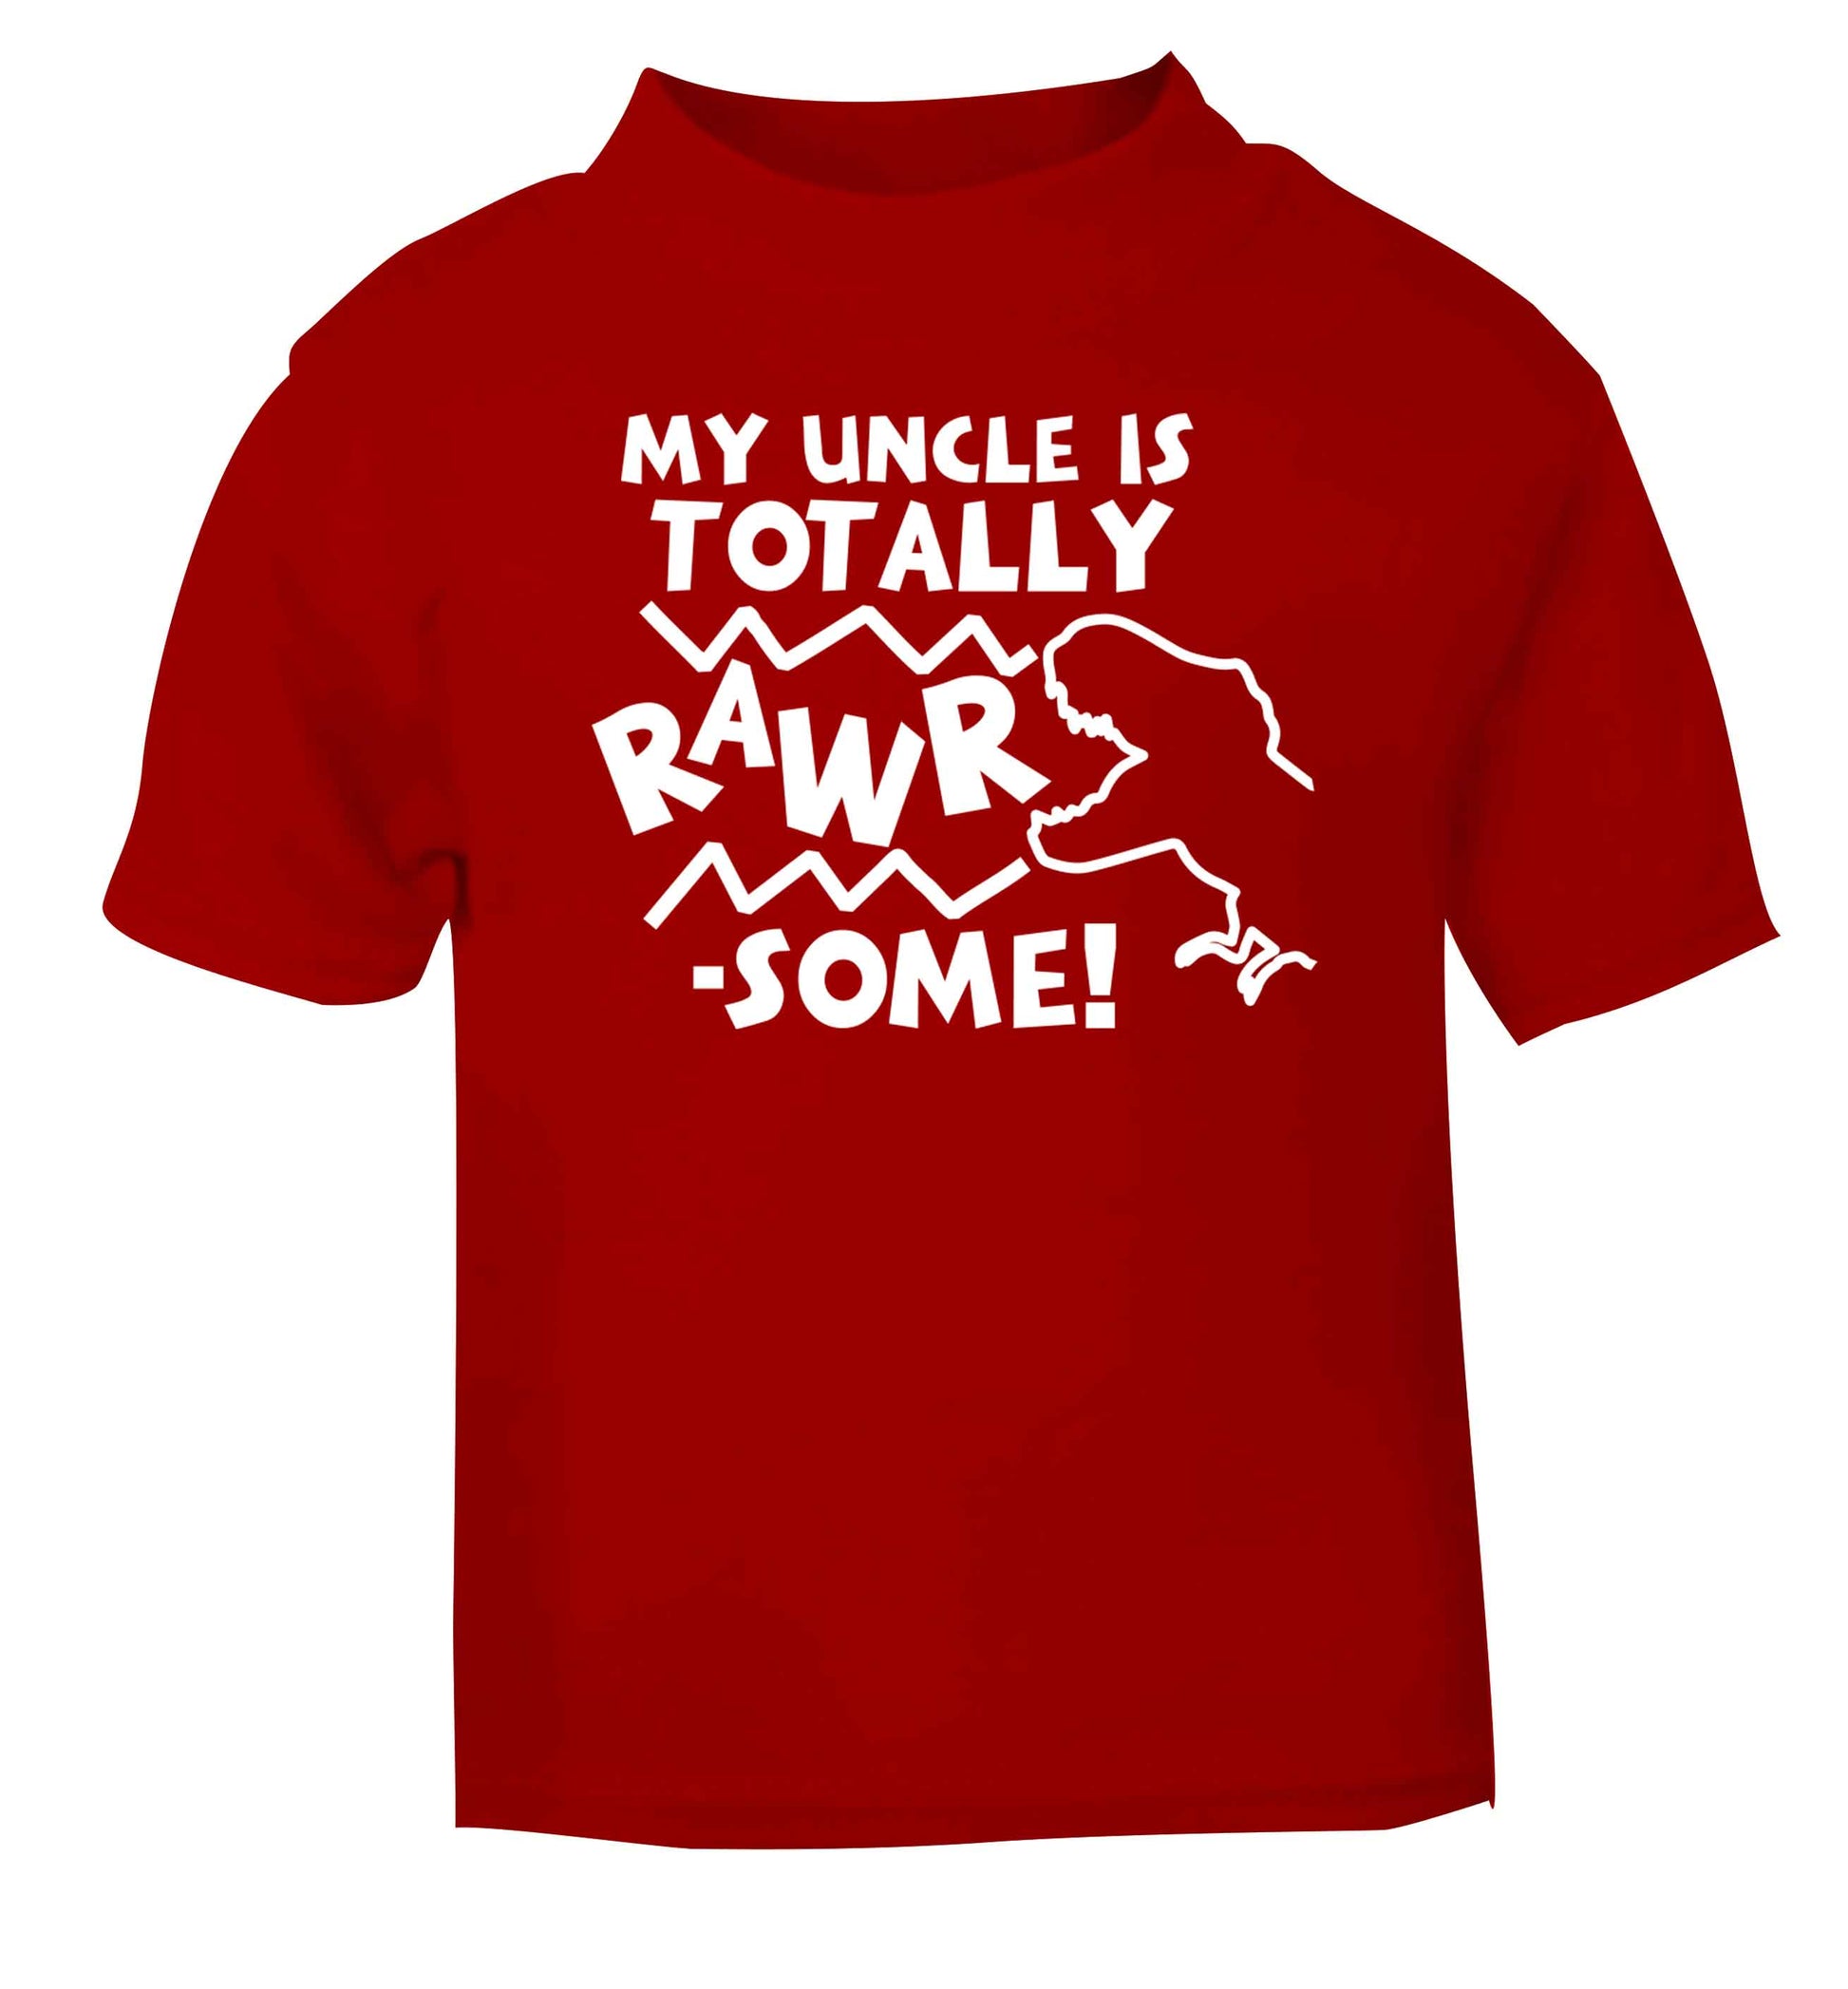 My uncle is totally rawrsome red baby toddler Tshirt 2 Years